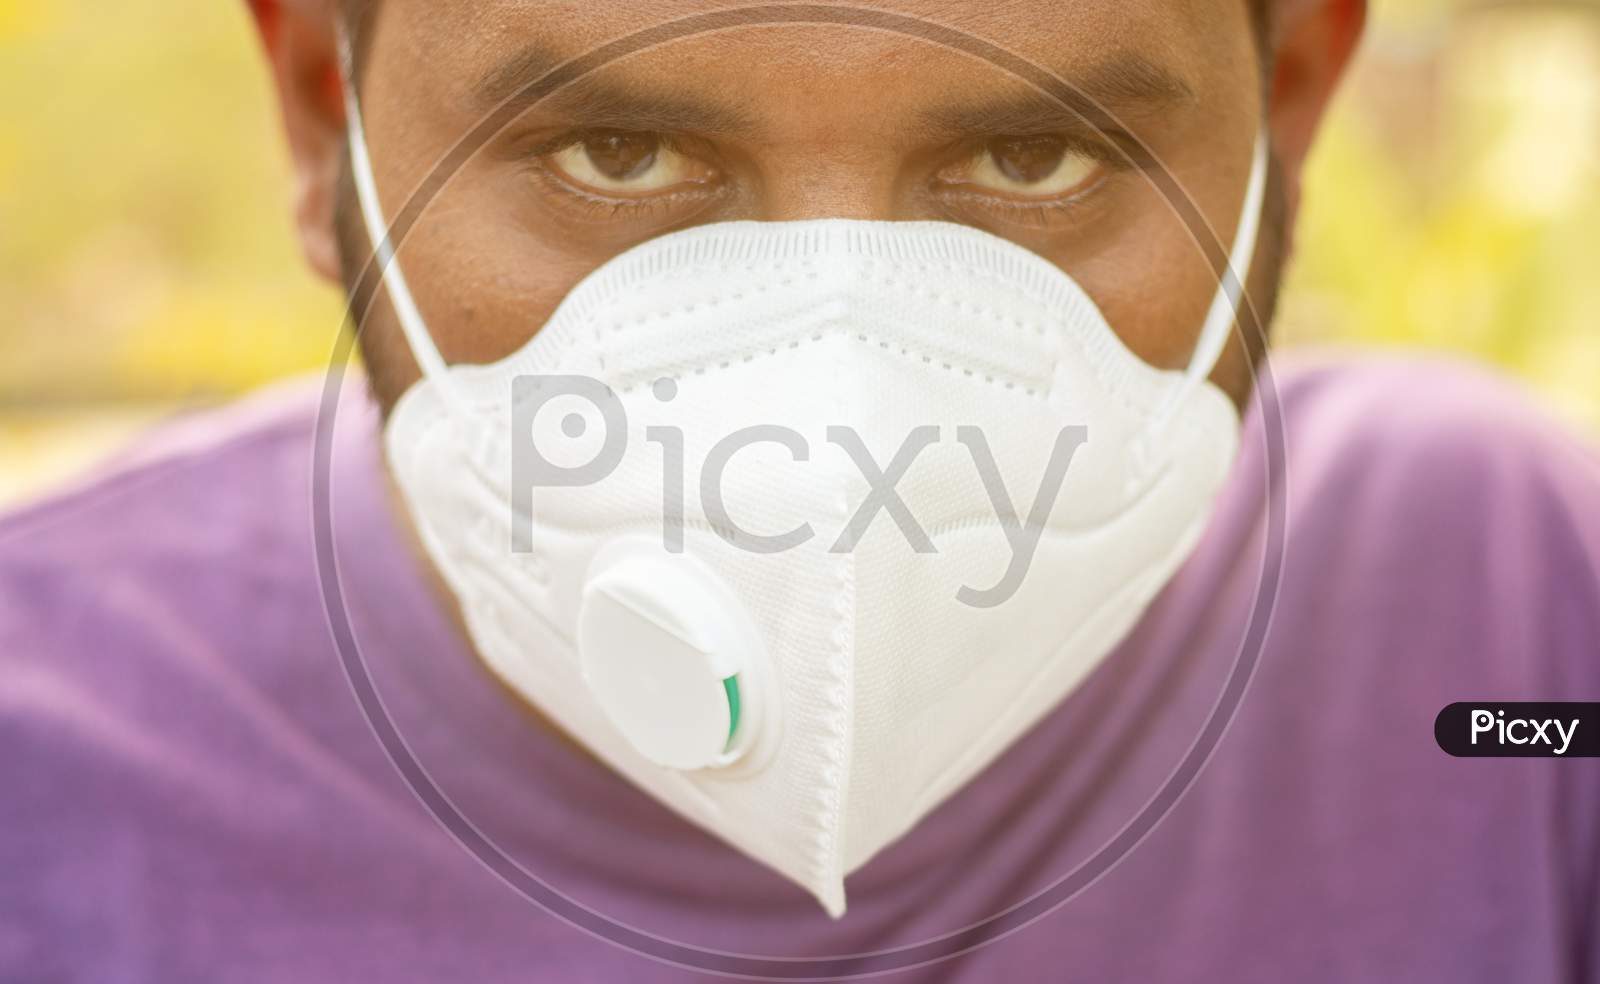 Close up Young Man Properly Covered Nose And Mouth With Face Mask - Awareness And Safety Concept To Ware Mask Properly, To Protect From Coronavirus Or Covid-19